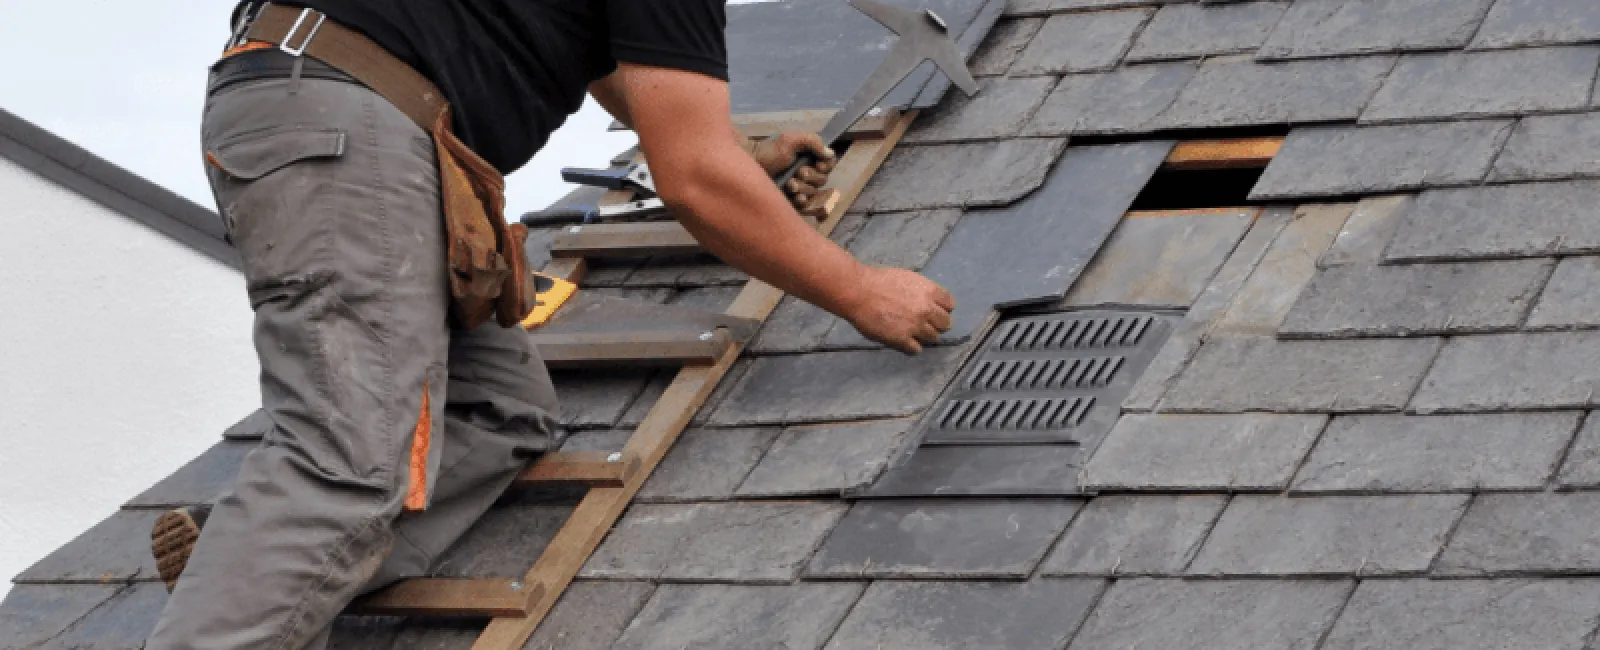 Things to Avoid When Considering a New Roof